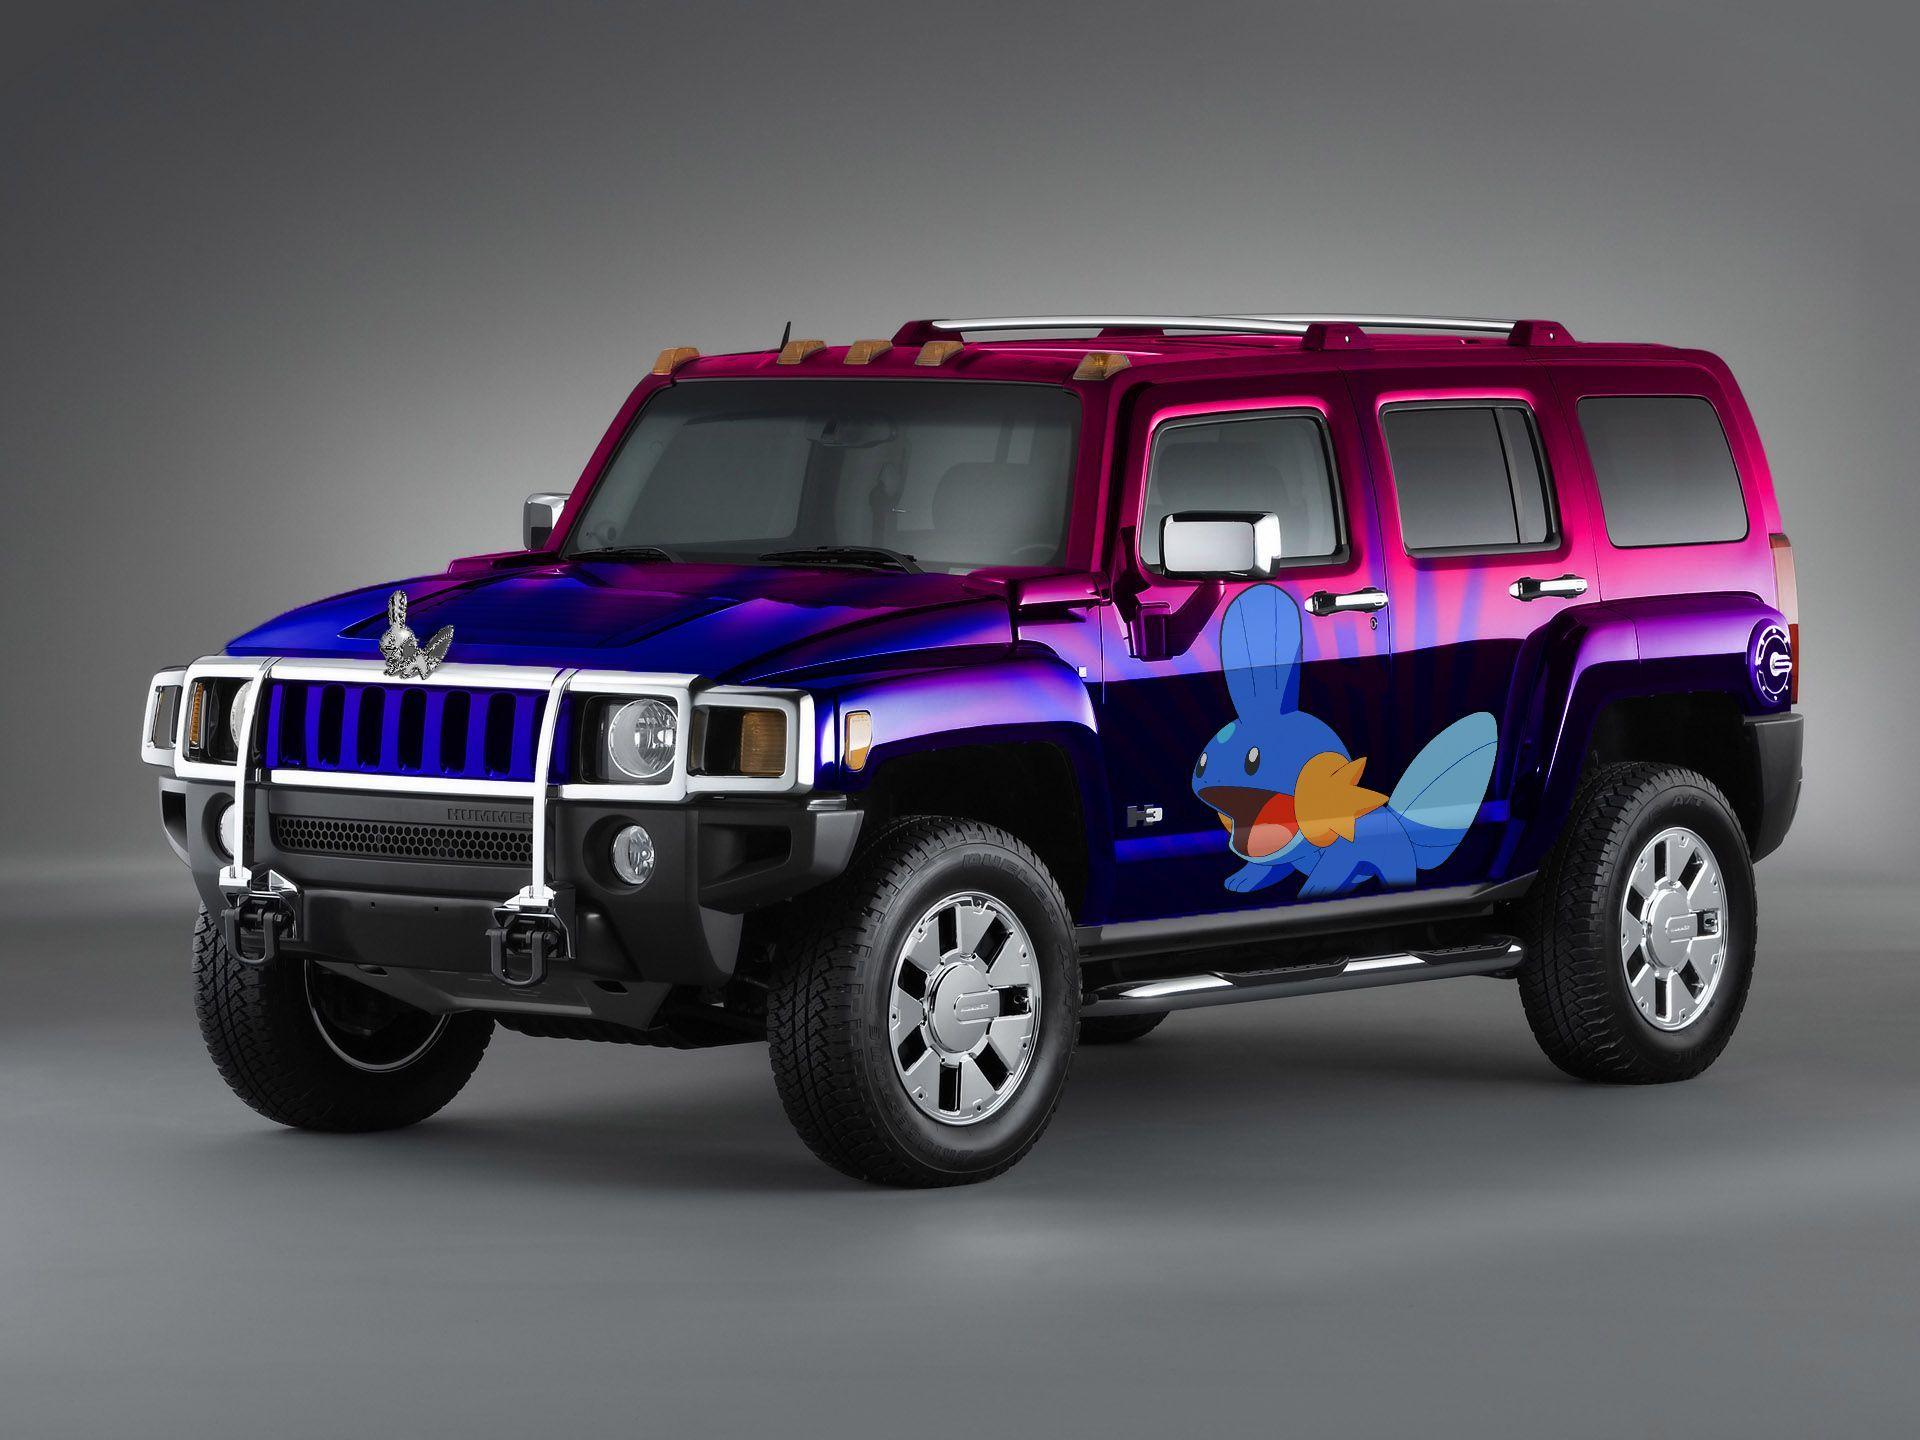 Hummer H3 Modified Image 2016 Cars Wallpaper